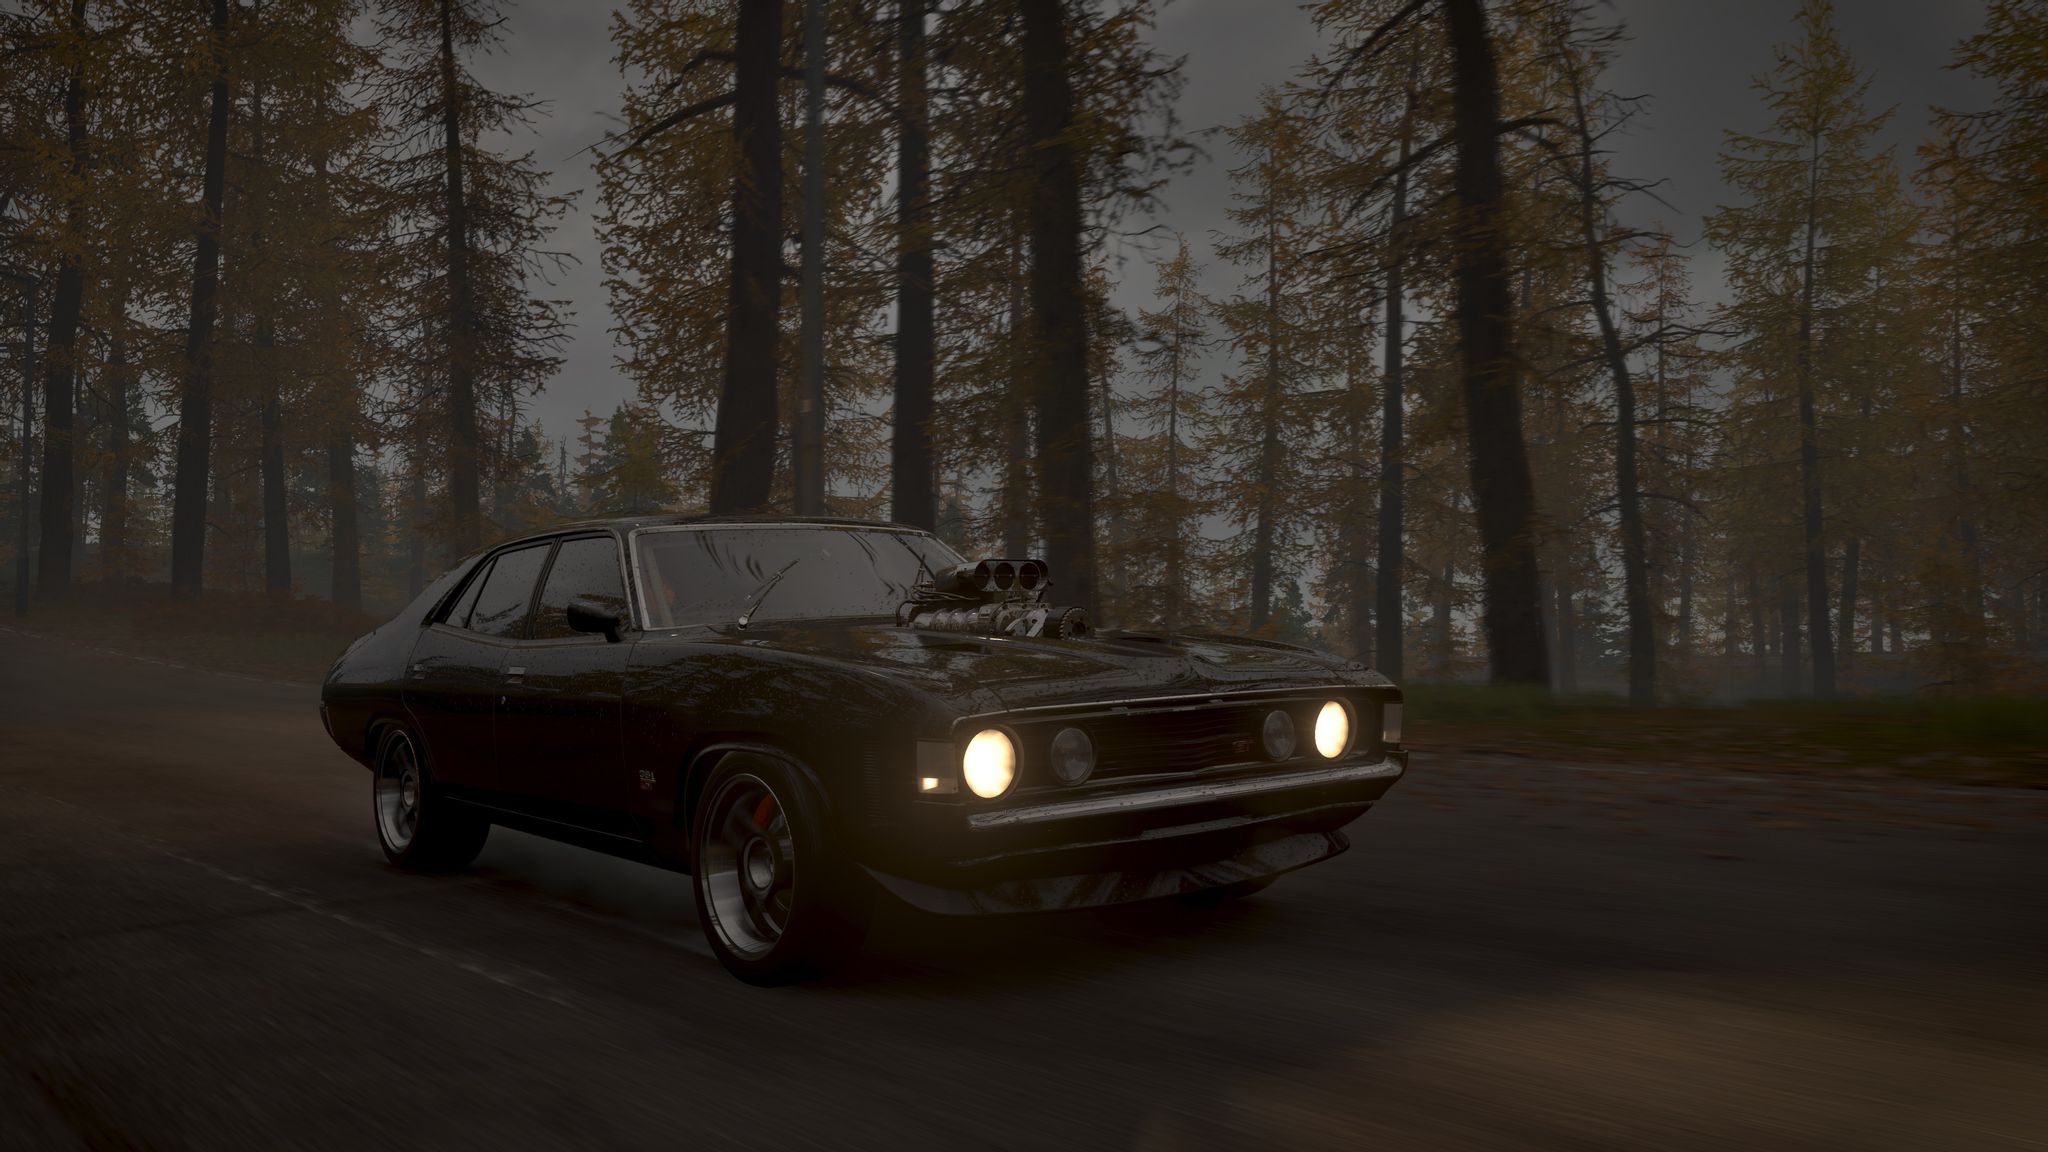 A screenshot from Forza Horizon 4 of a black Ford Falcon GT-HO with its headlights on and a big mechanical air intake poking out of the bonnet, Mad Max-style. It's fairly dark and the car is driving through a bunch of tall trees with grey sky visible through them.